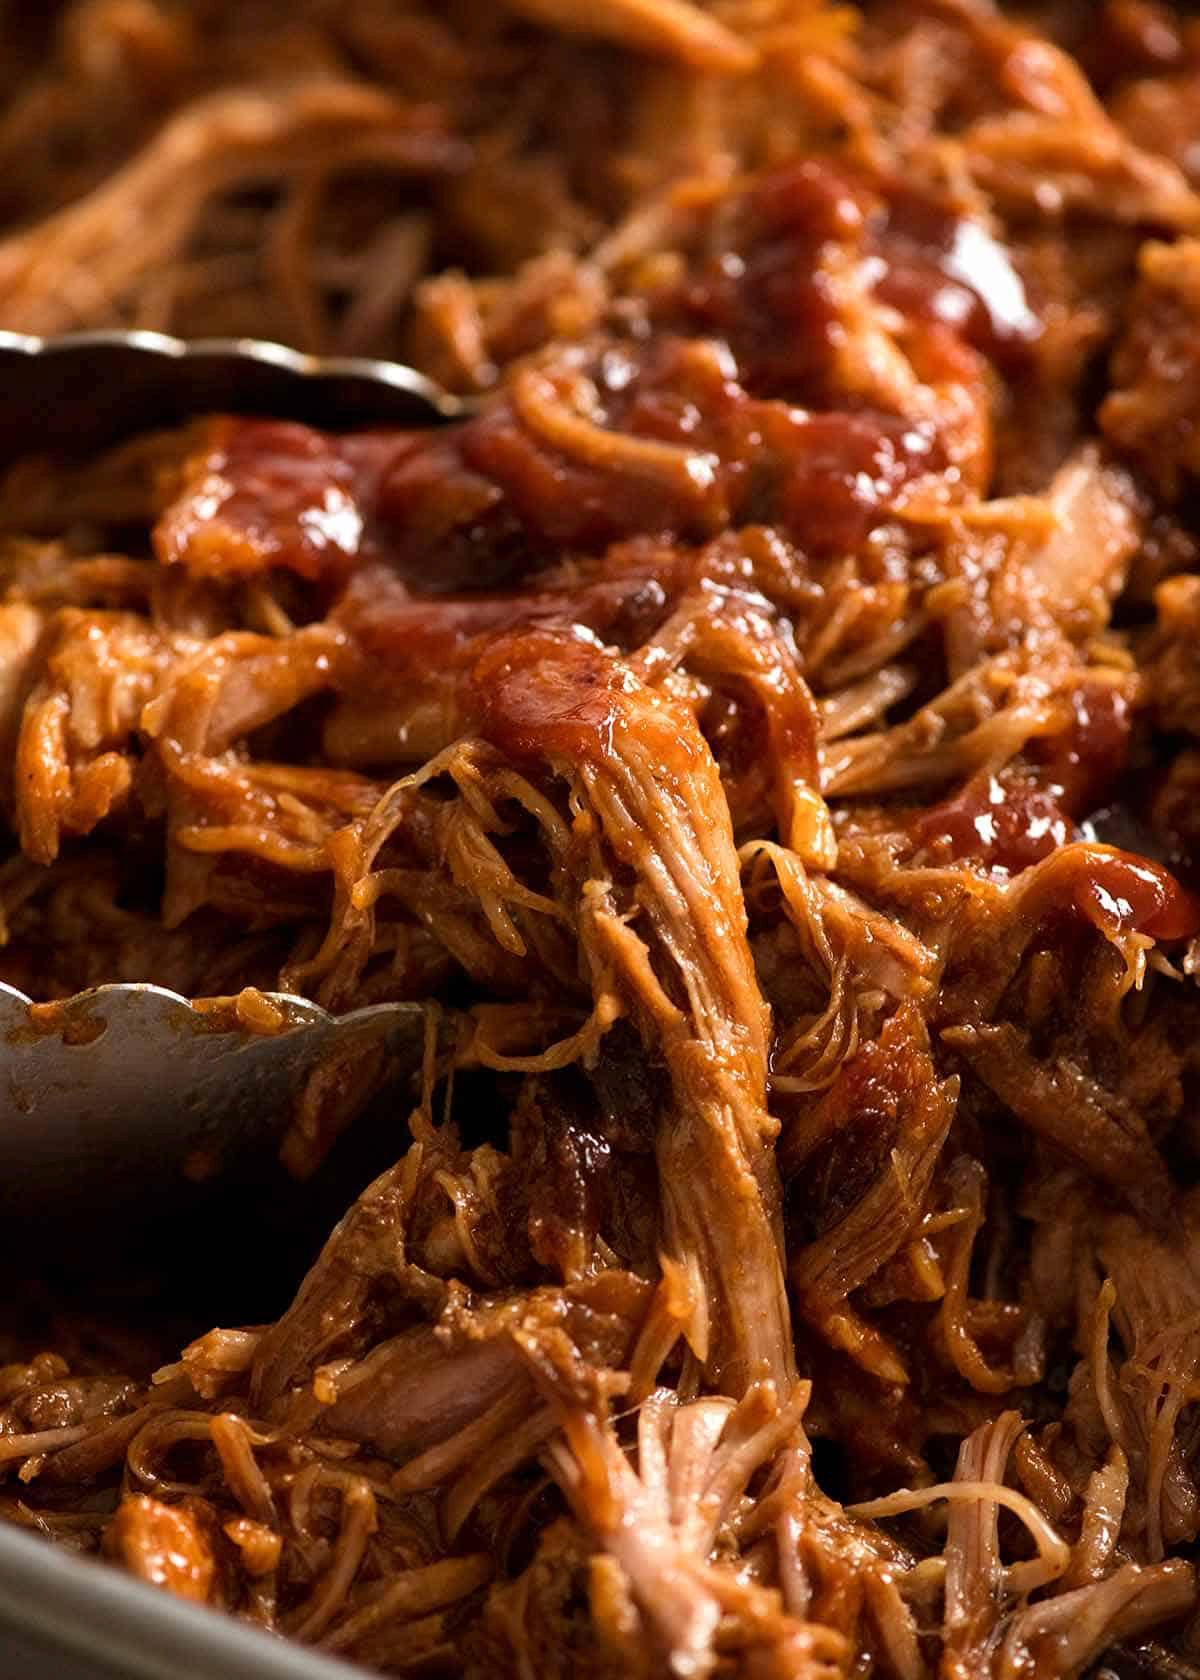 Pulled pork is a known crowd favourite!